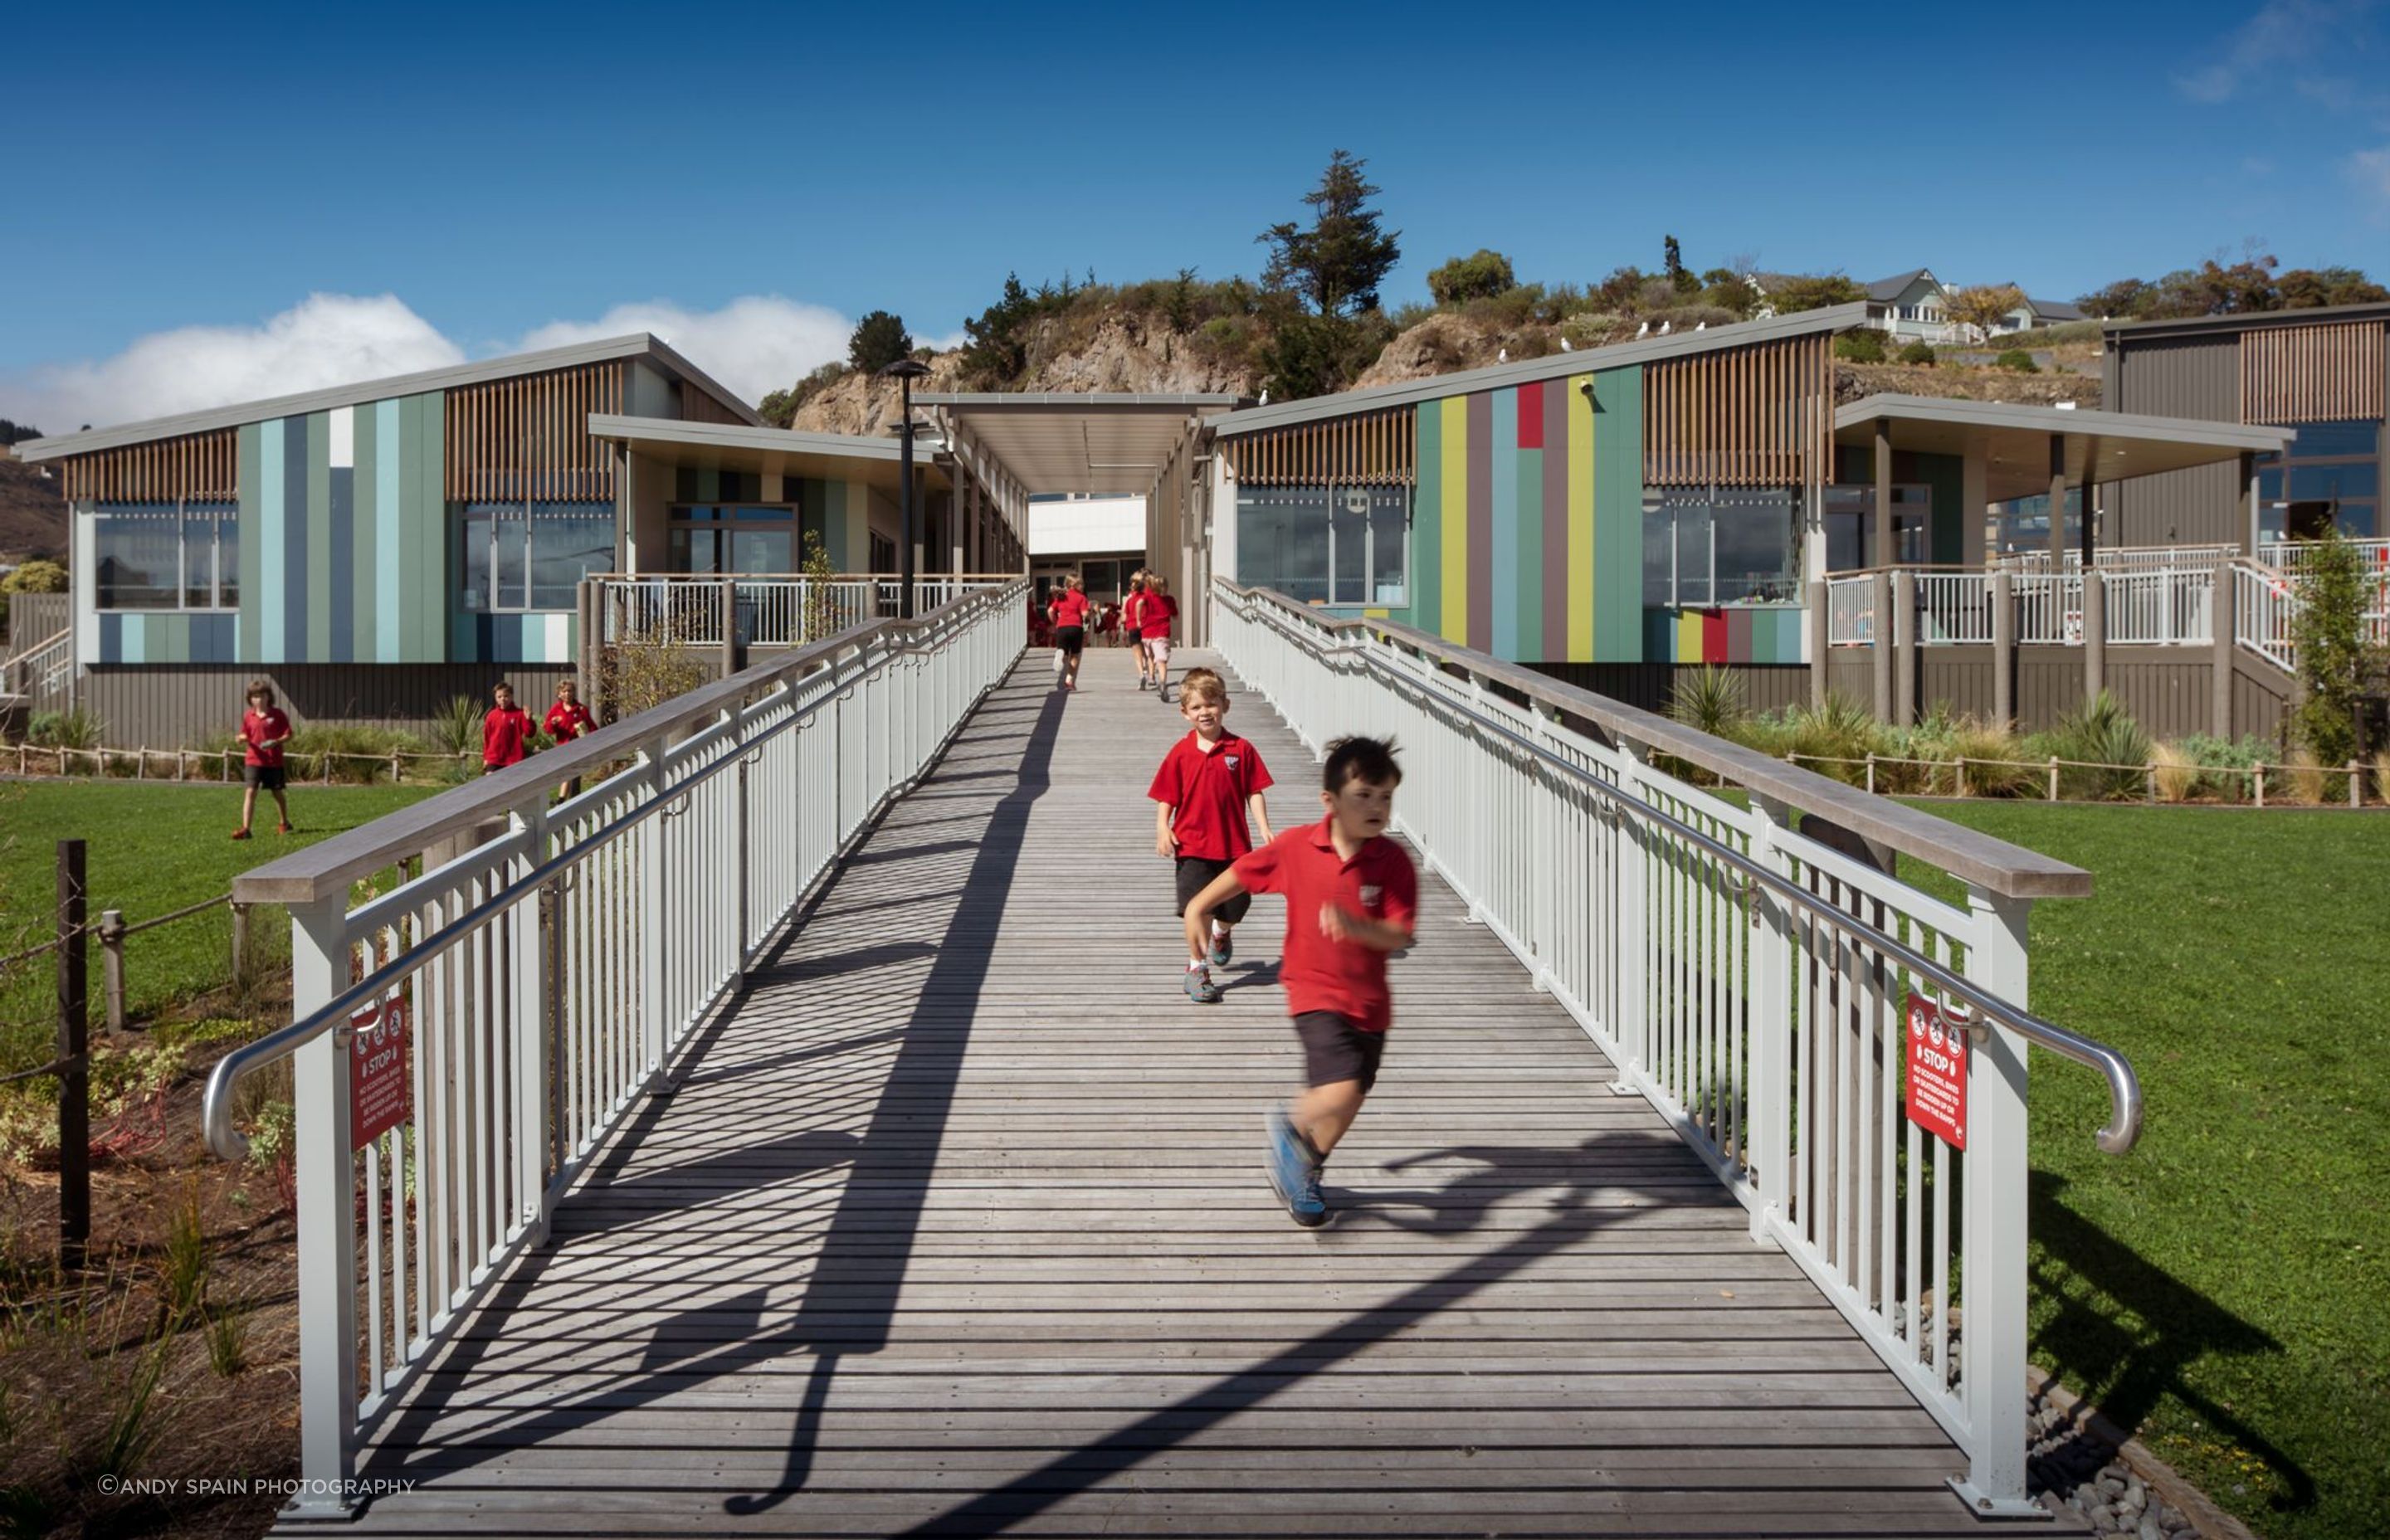 Currently the school has capacity for 300 students, however, the masterplan allows for a further 100 students to be accommodated in two 'boatshed' buildings as and when the roll increases.